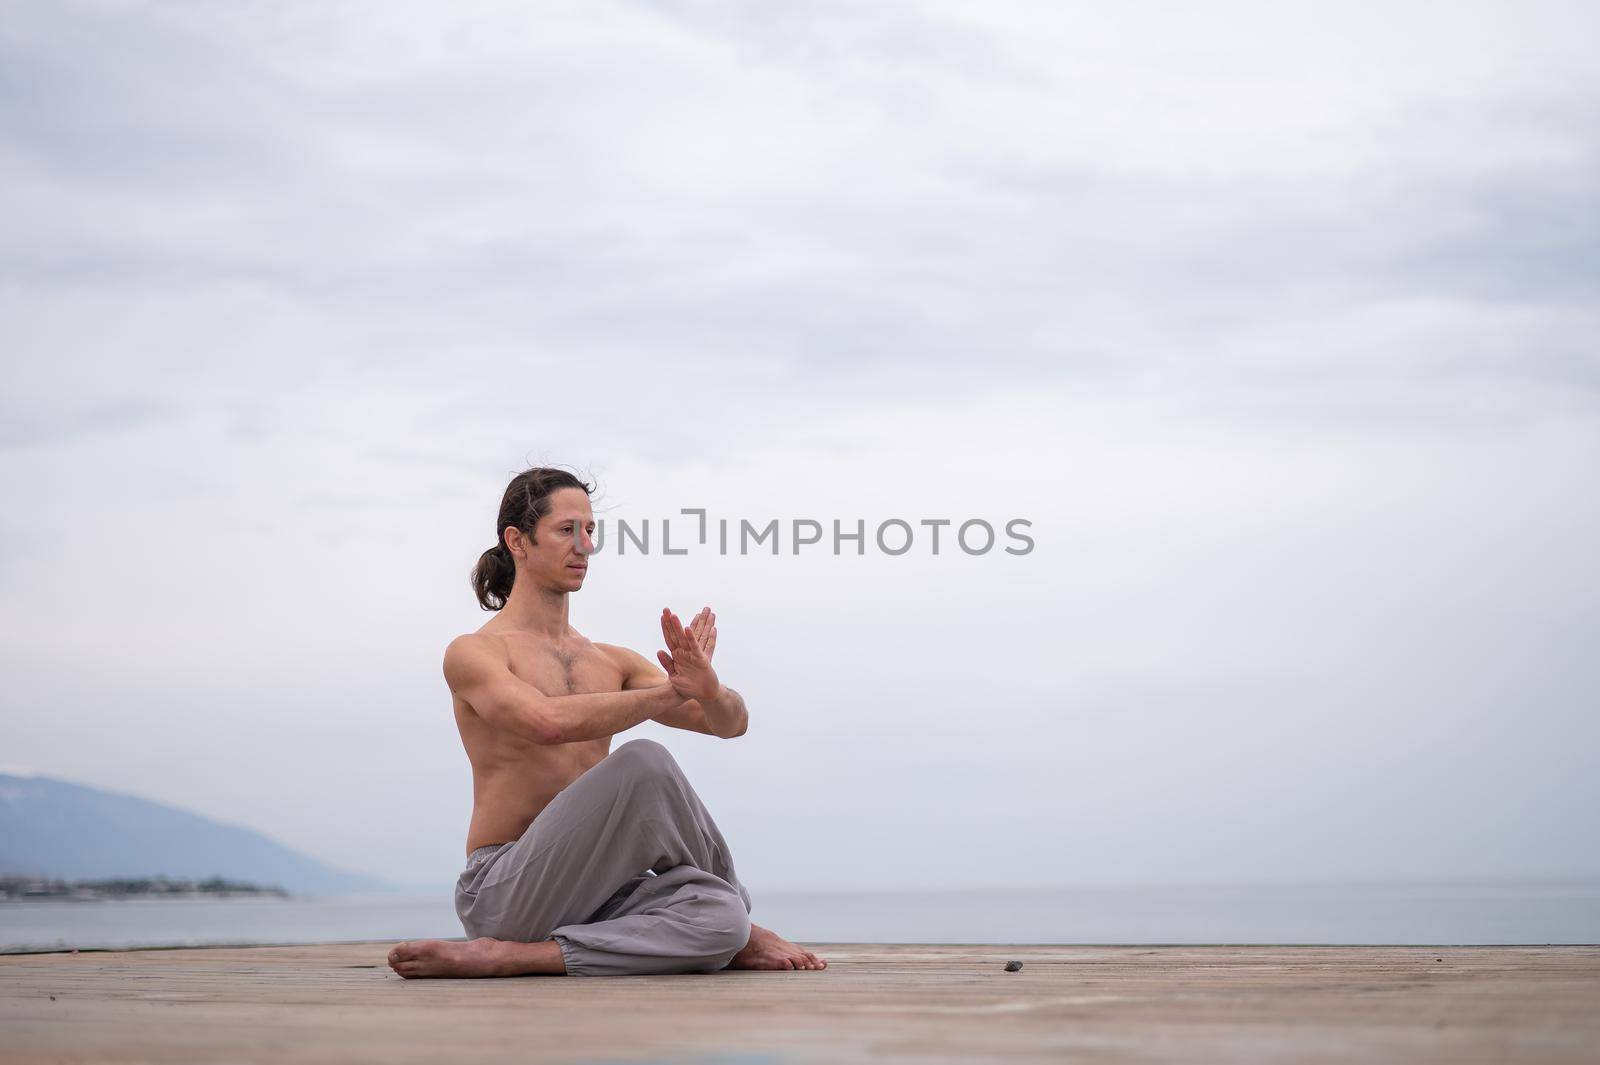 Caucasian man with naked torso practicing wushu on the seashore